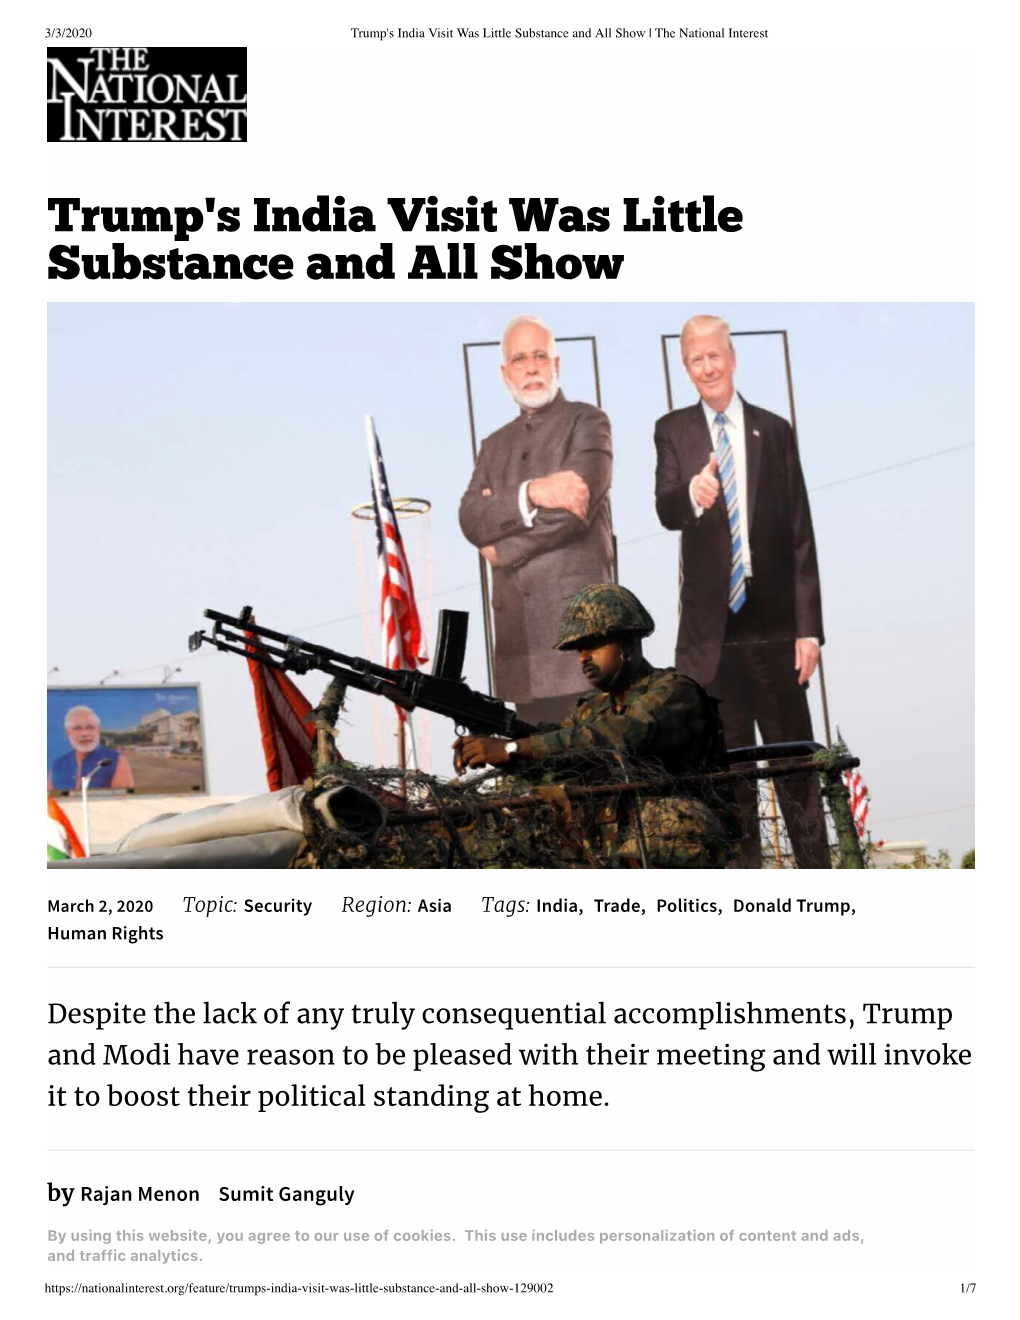 Trump's India Visit Was Little Substance and All Show | the National Interest